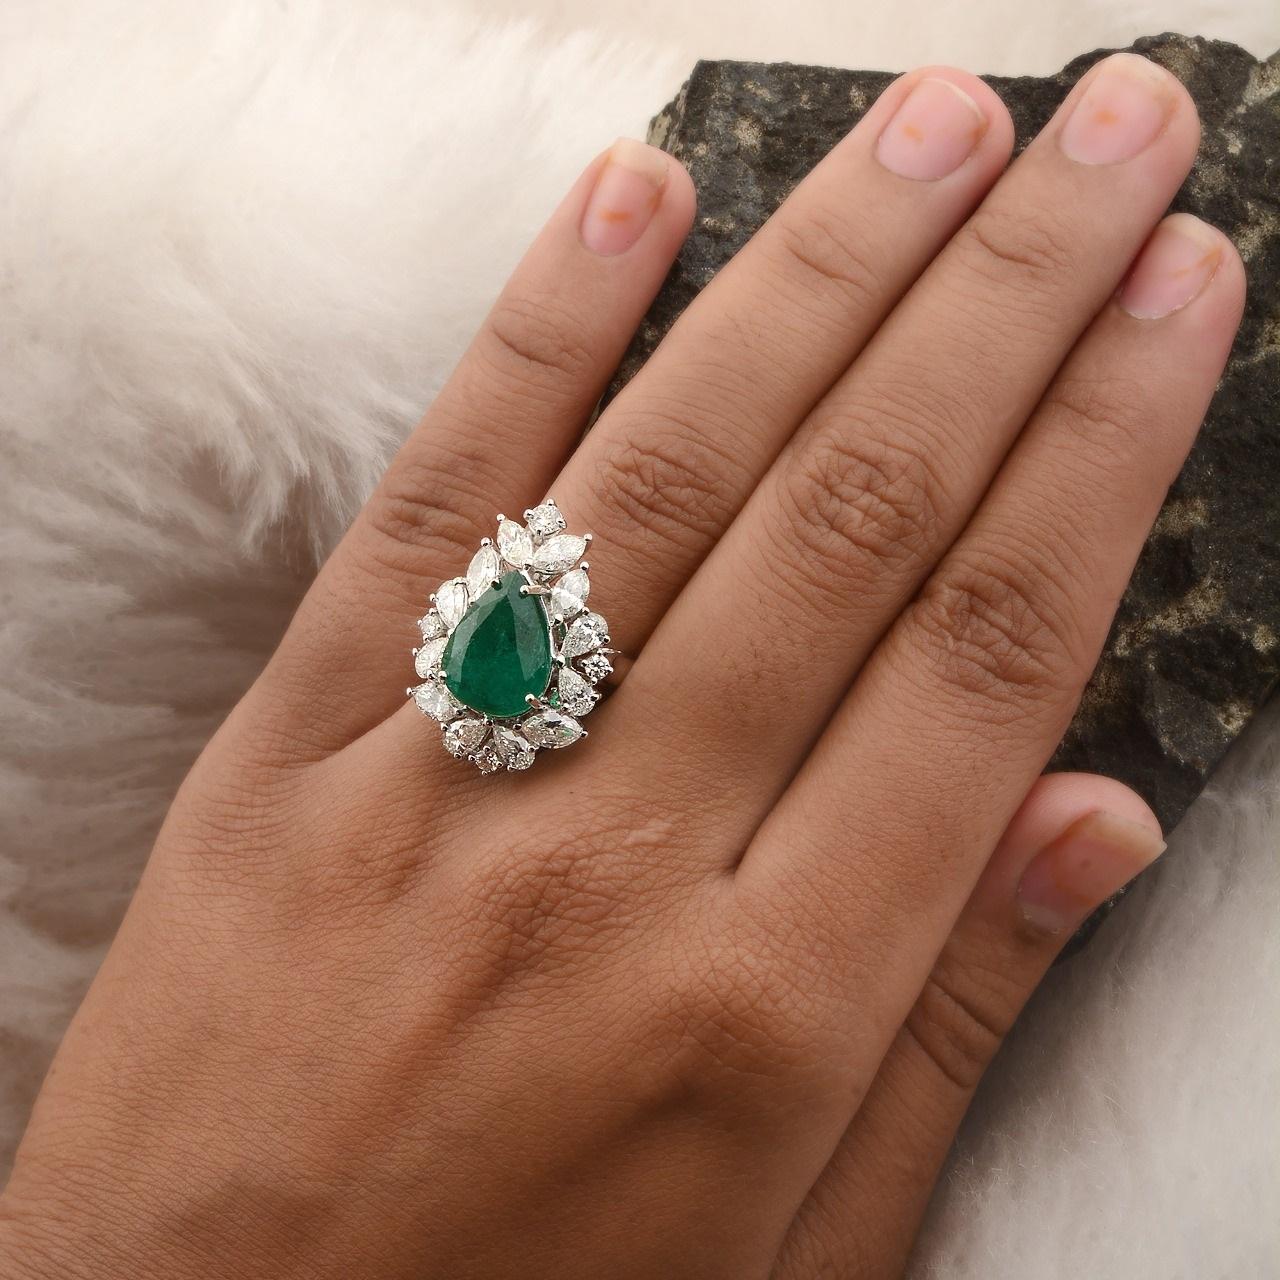 For Sale:  Pear Natural Emerald Gemstone Ring Diamond Solid 18k White Gold Fine Jewelry 4